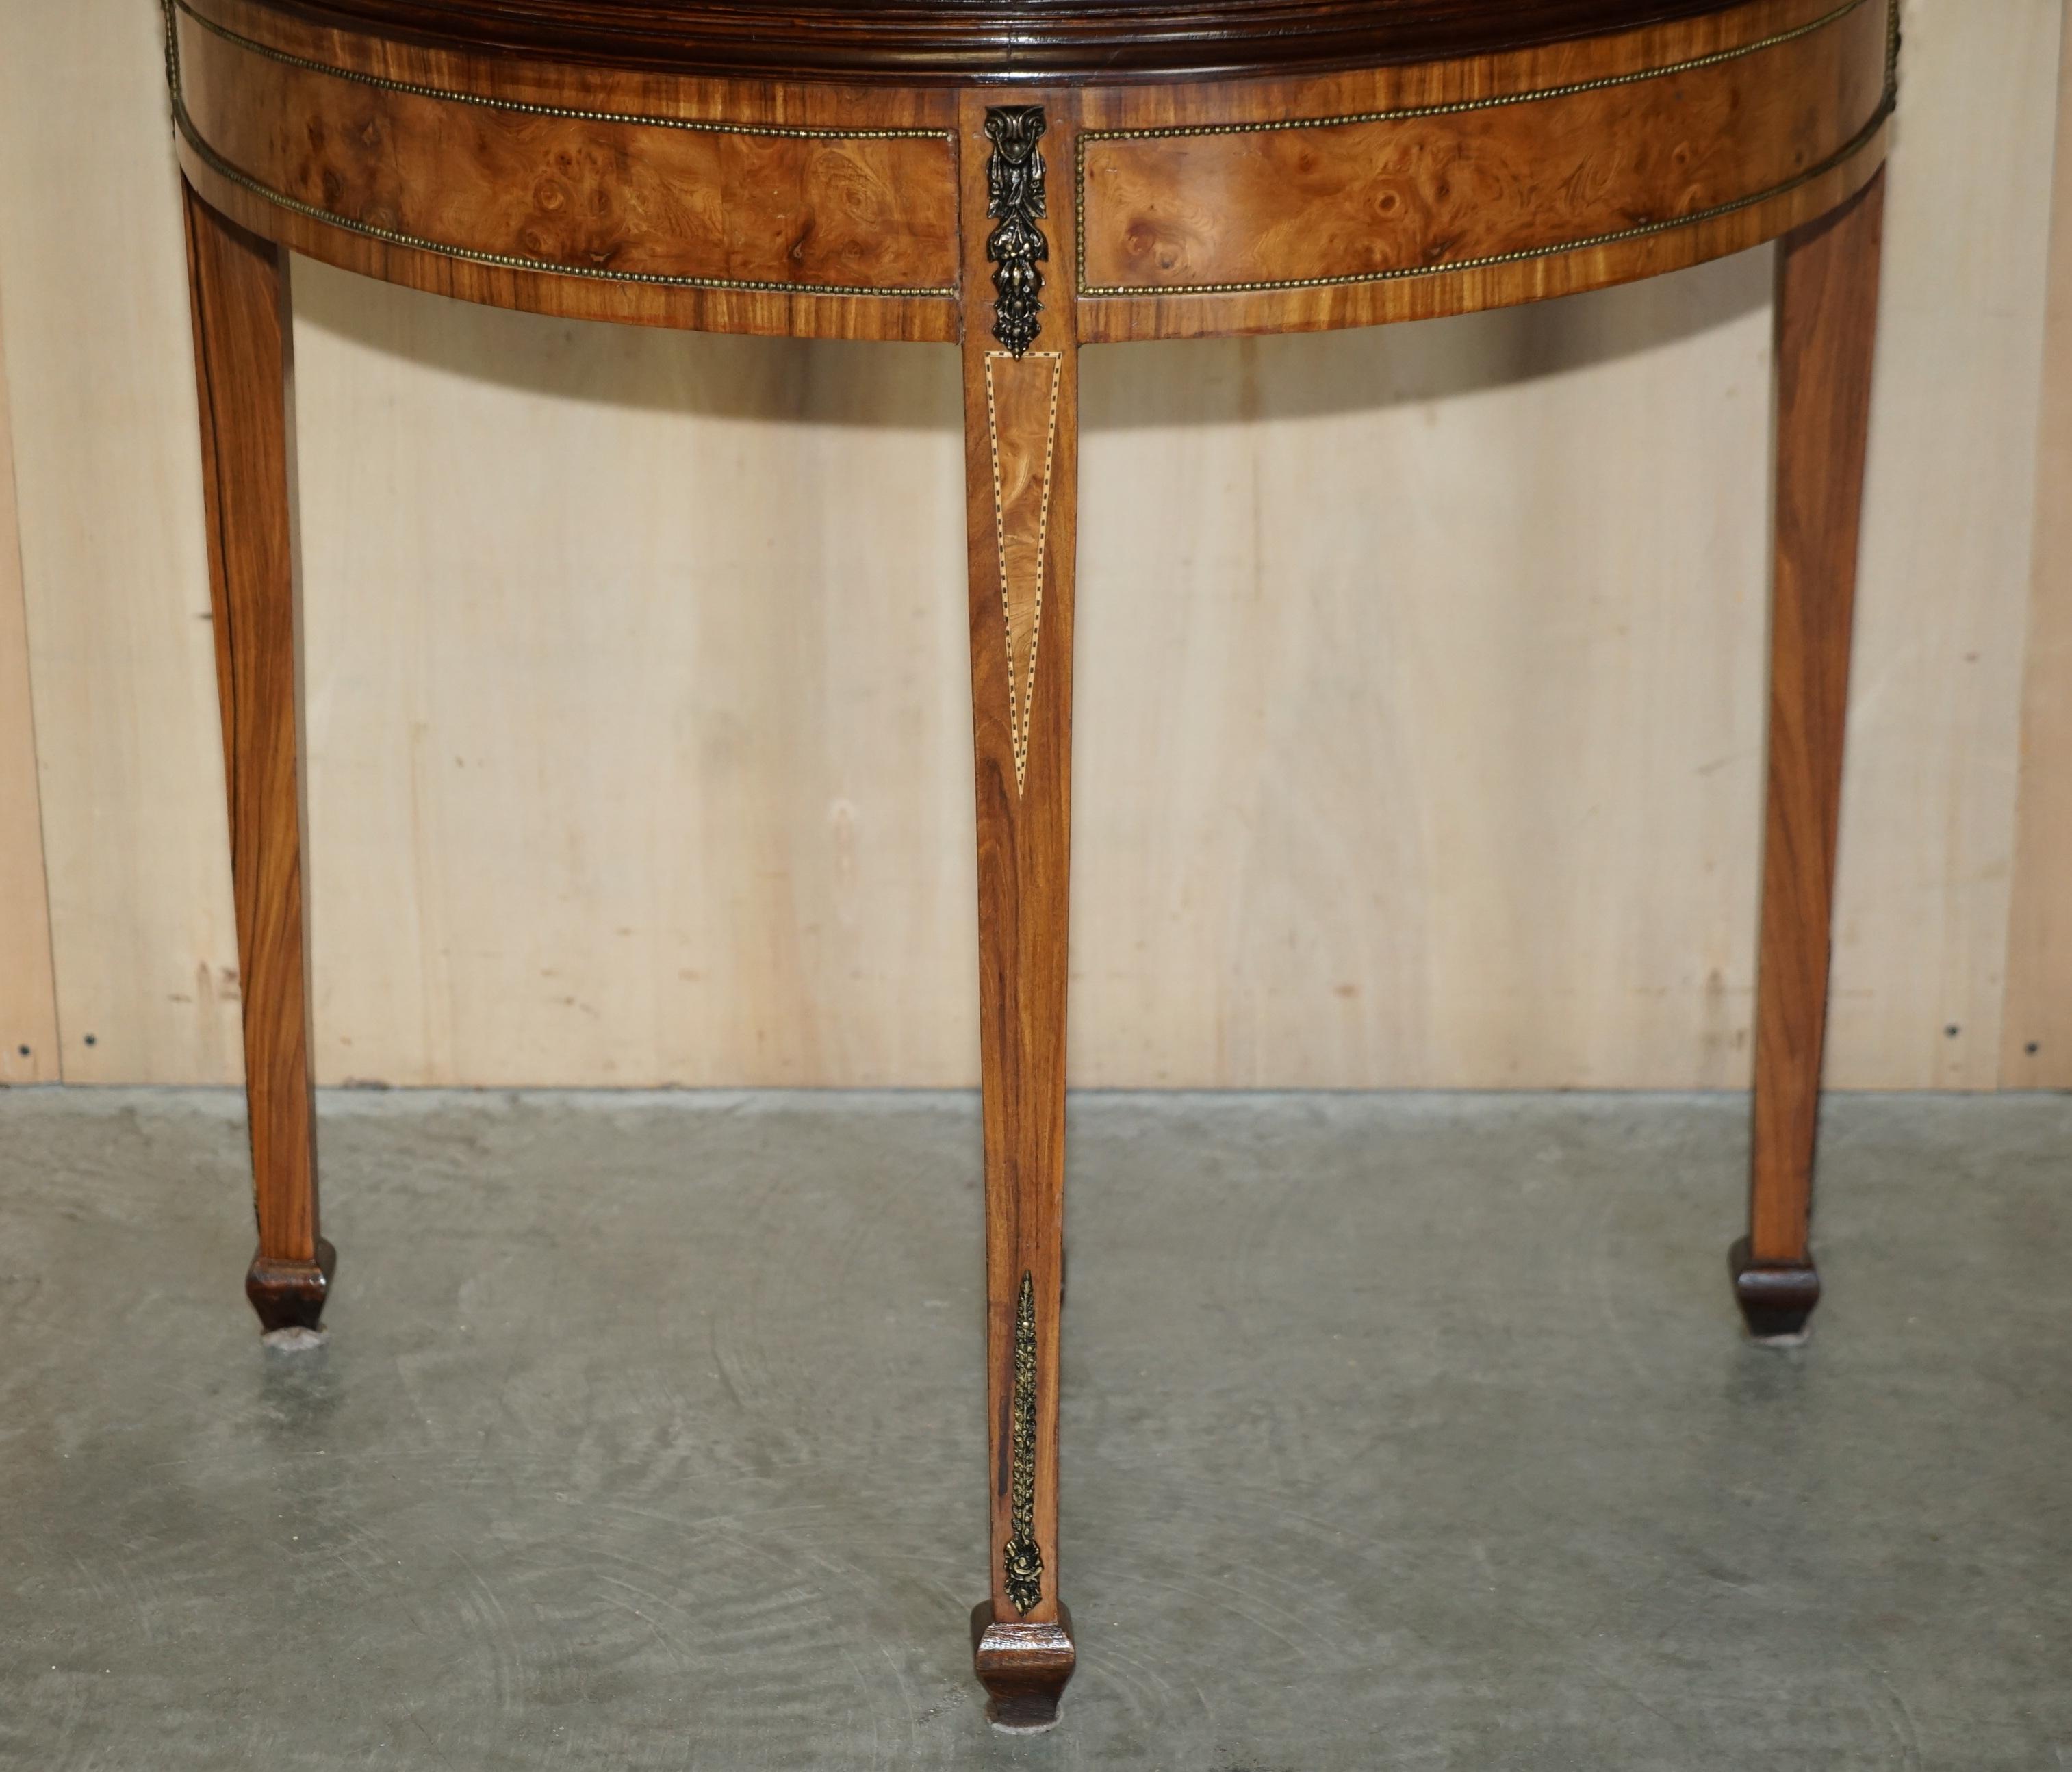 Hand-Crafted Vintage Burr Walnut Console Games Demi Lune Card Table Unfolds Lovely Timber For Sale